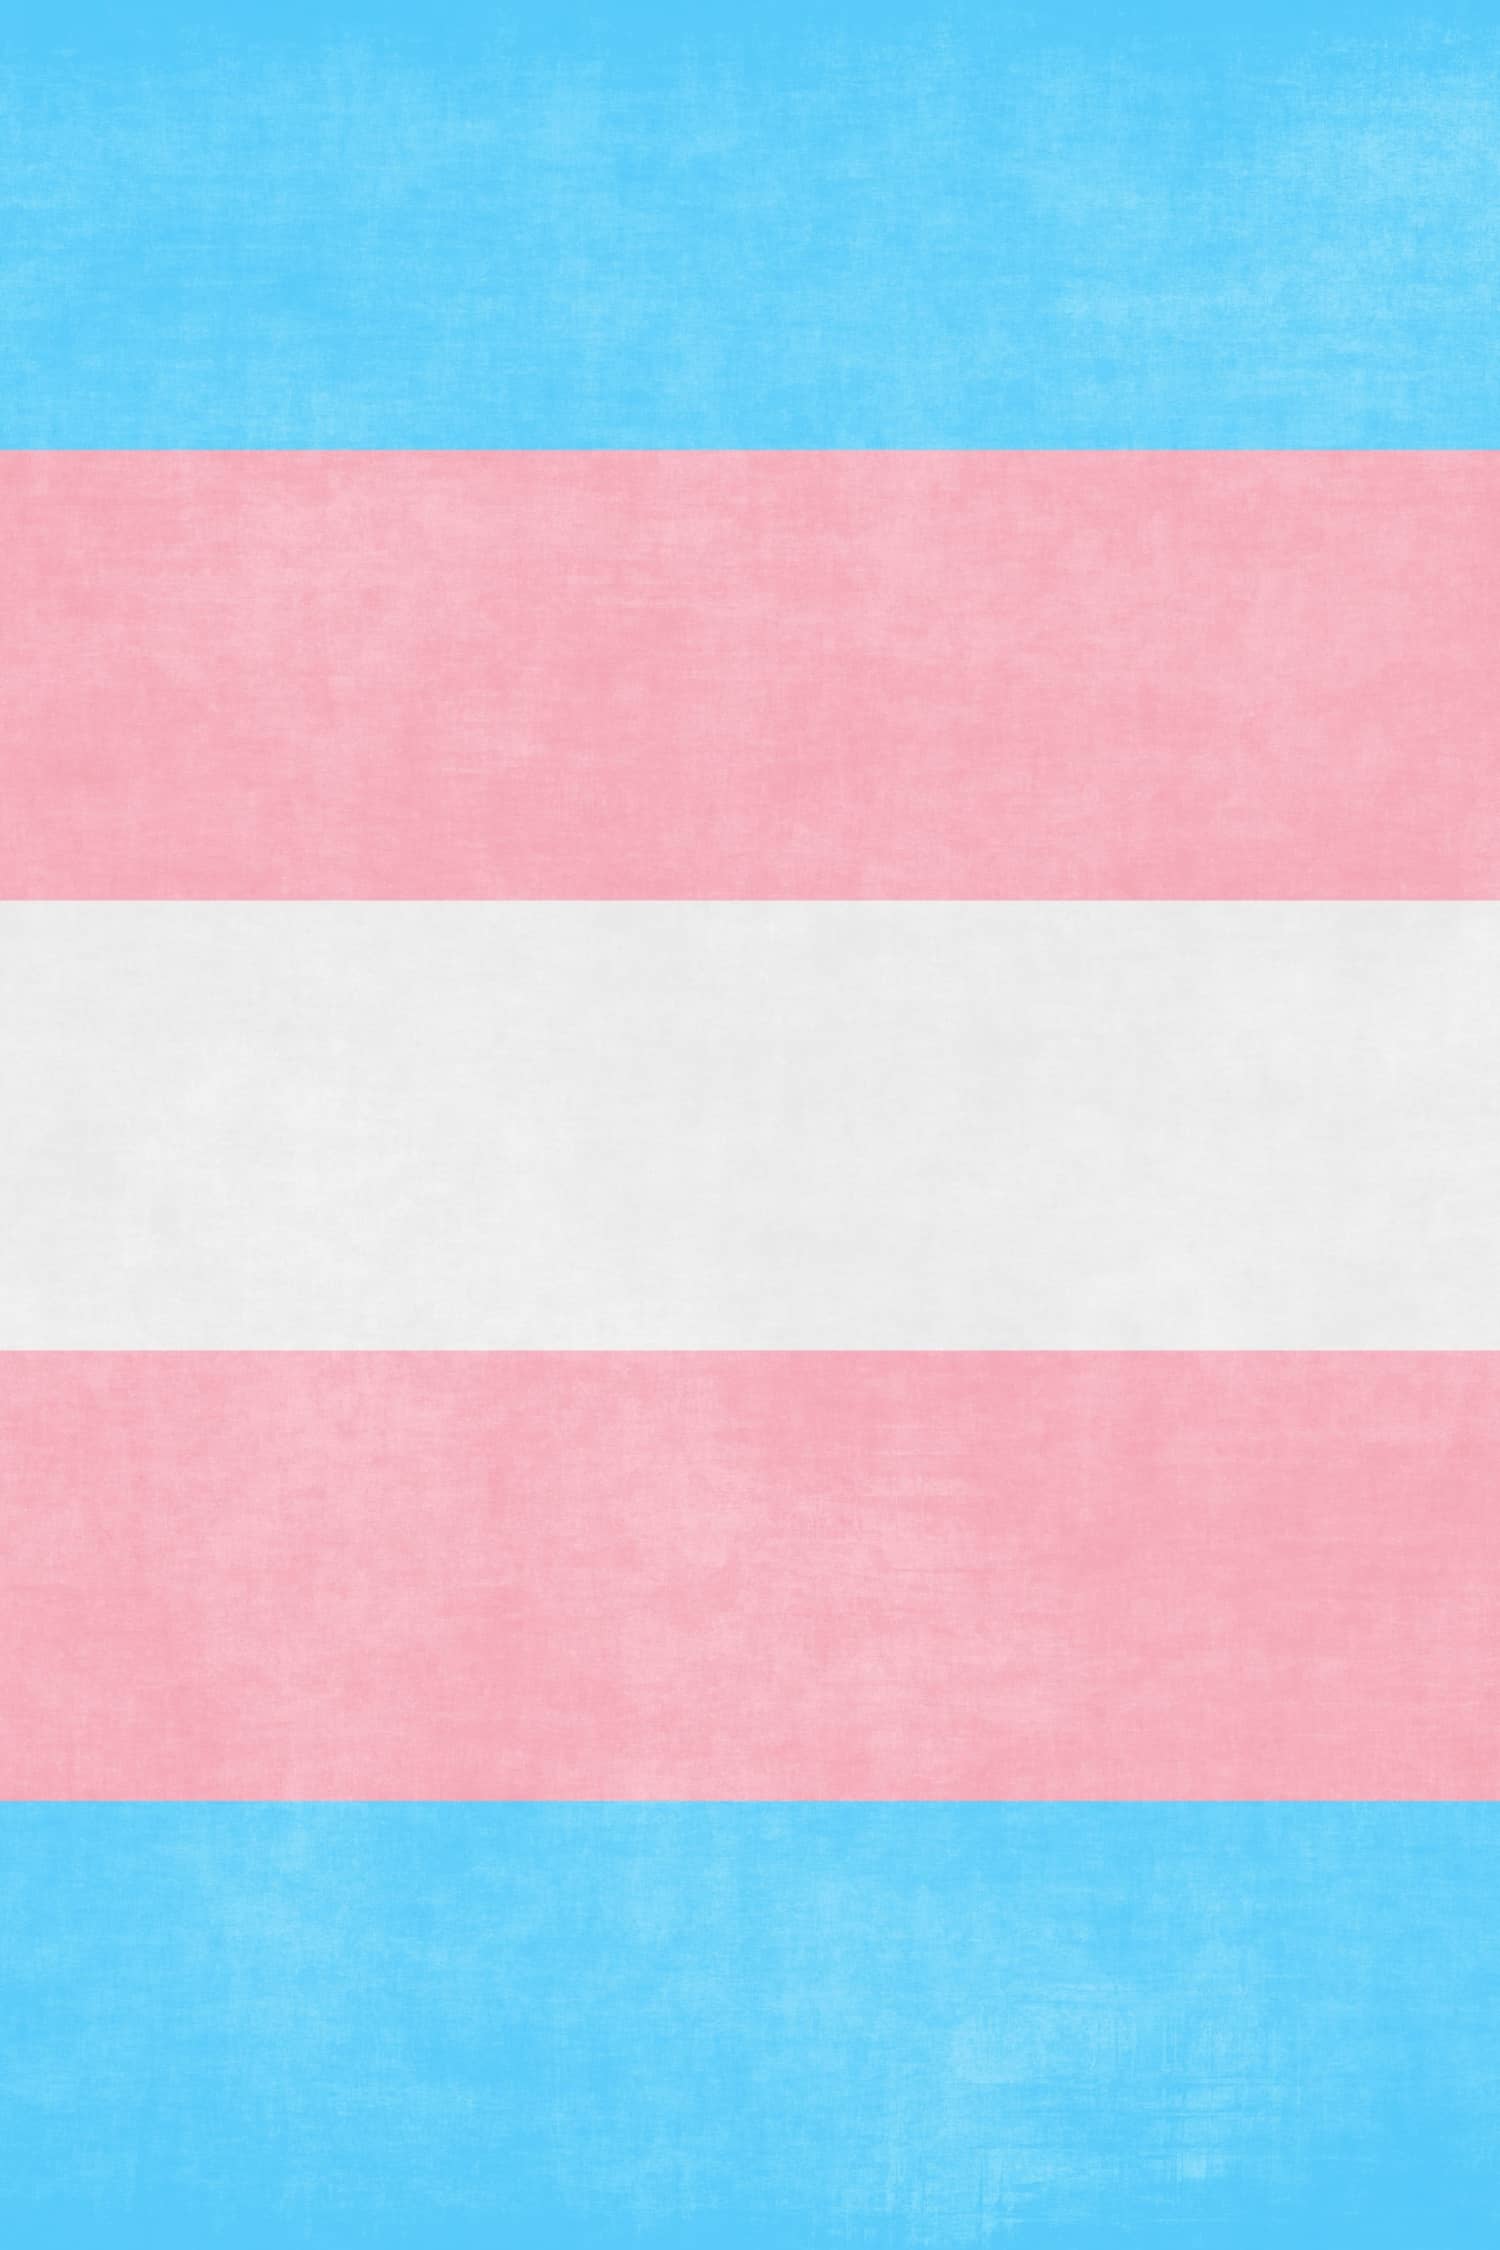 Transgender Glossary: Terms You Can Learn > News > Yale Medicine